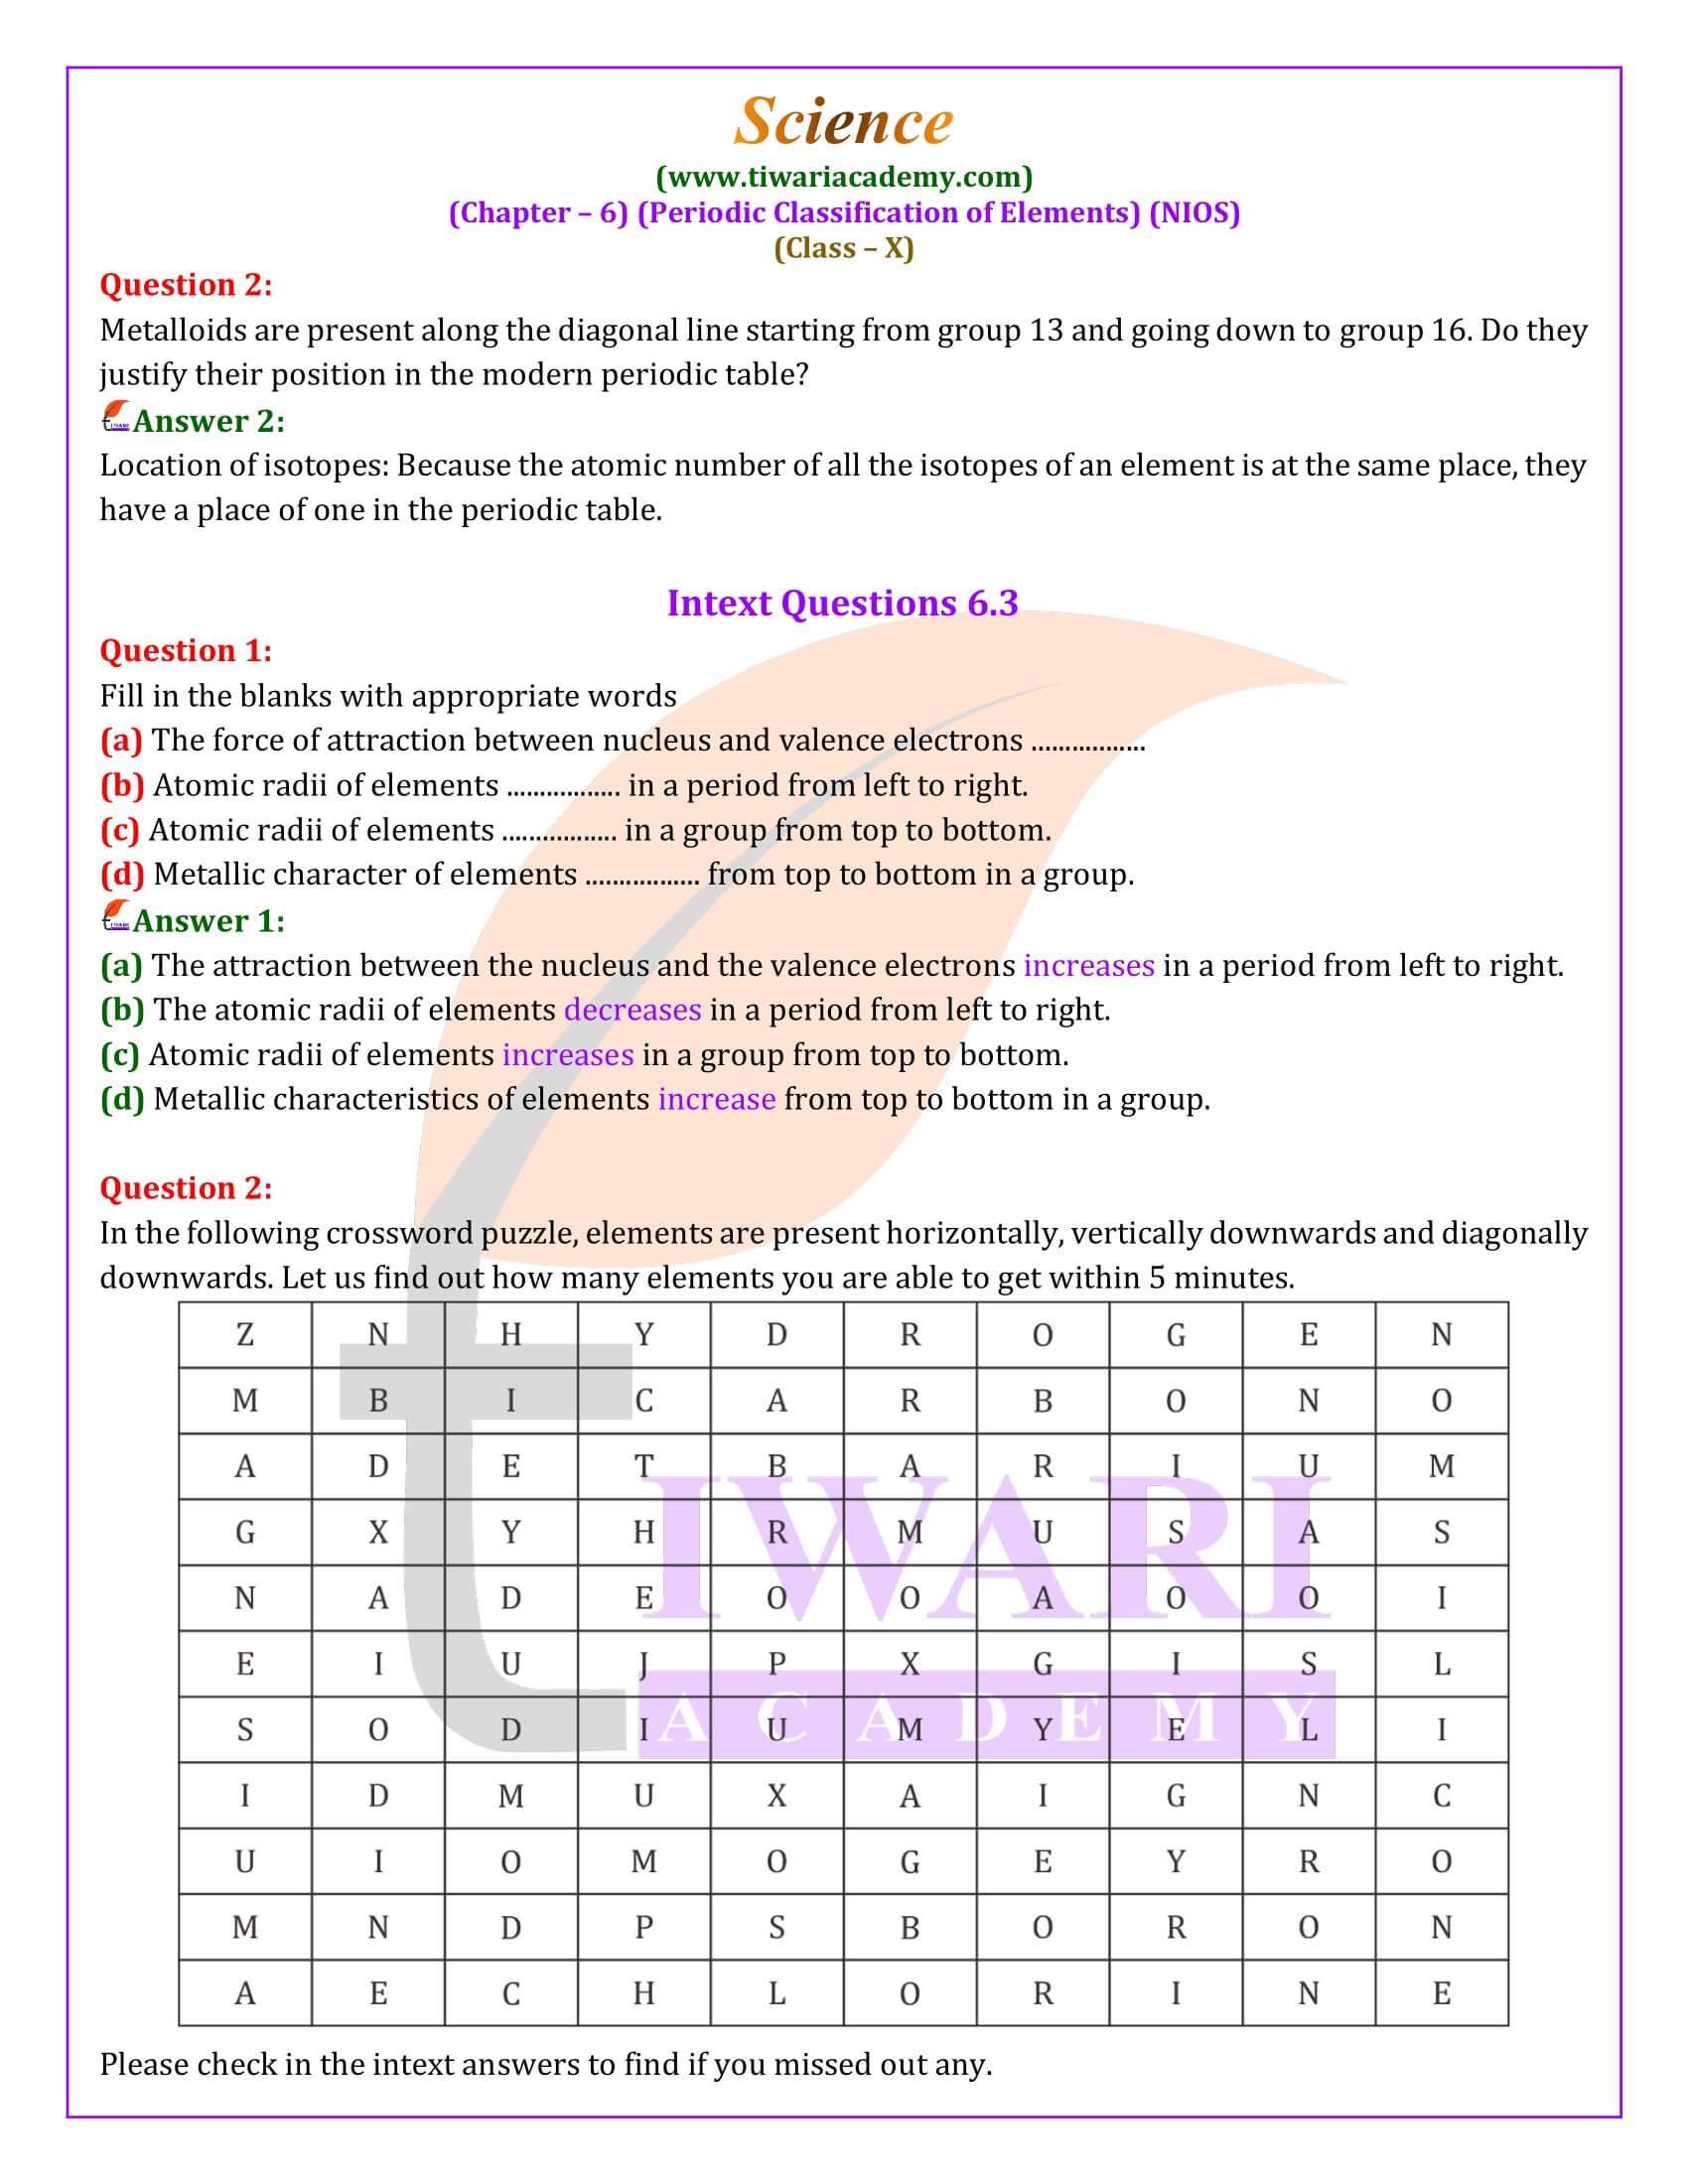 NIOS Class 10 Science Chapter 6 Periodic Classification of Elements Solutions